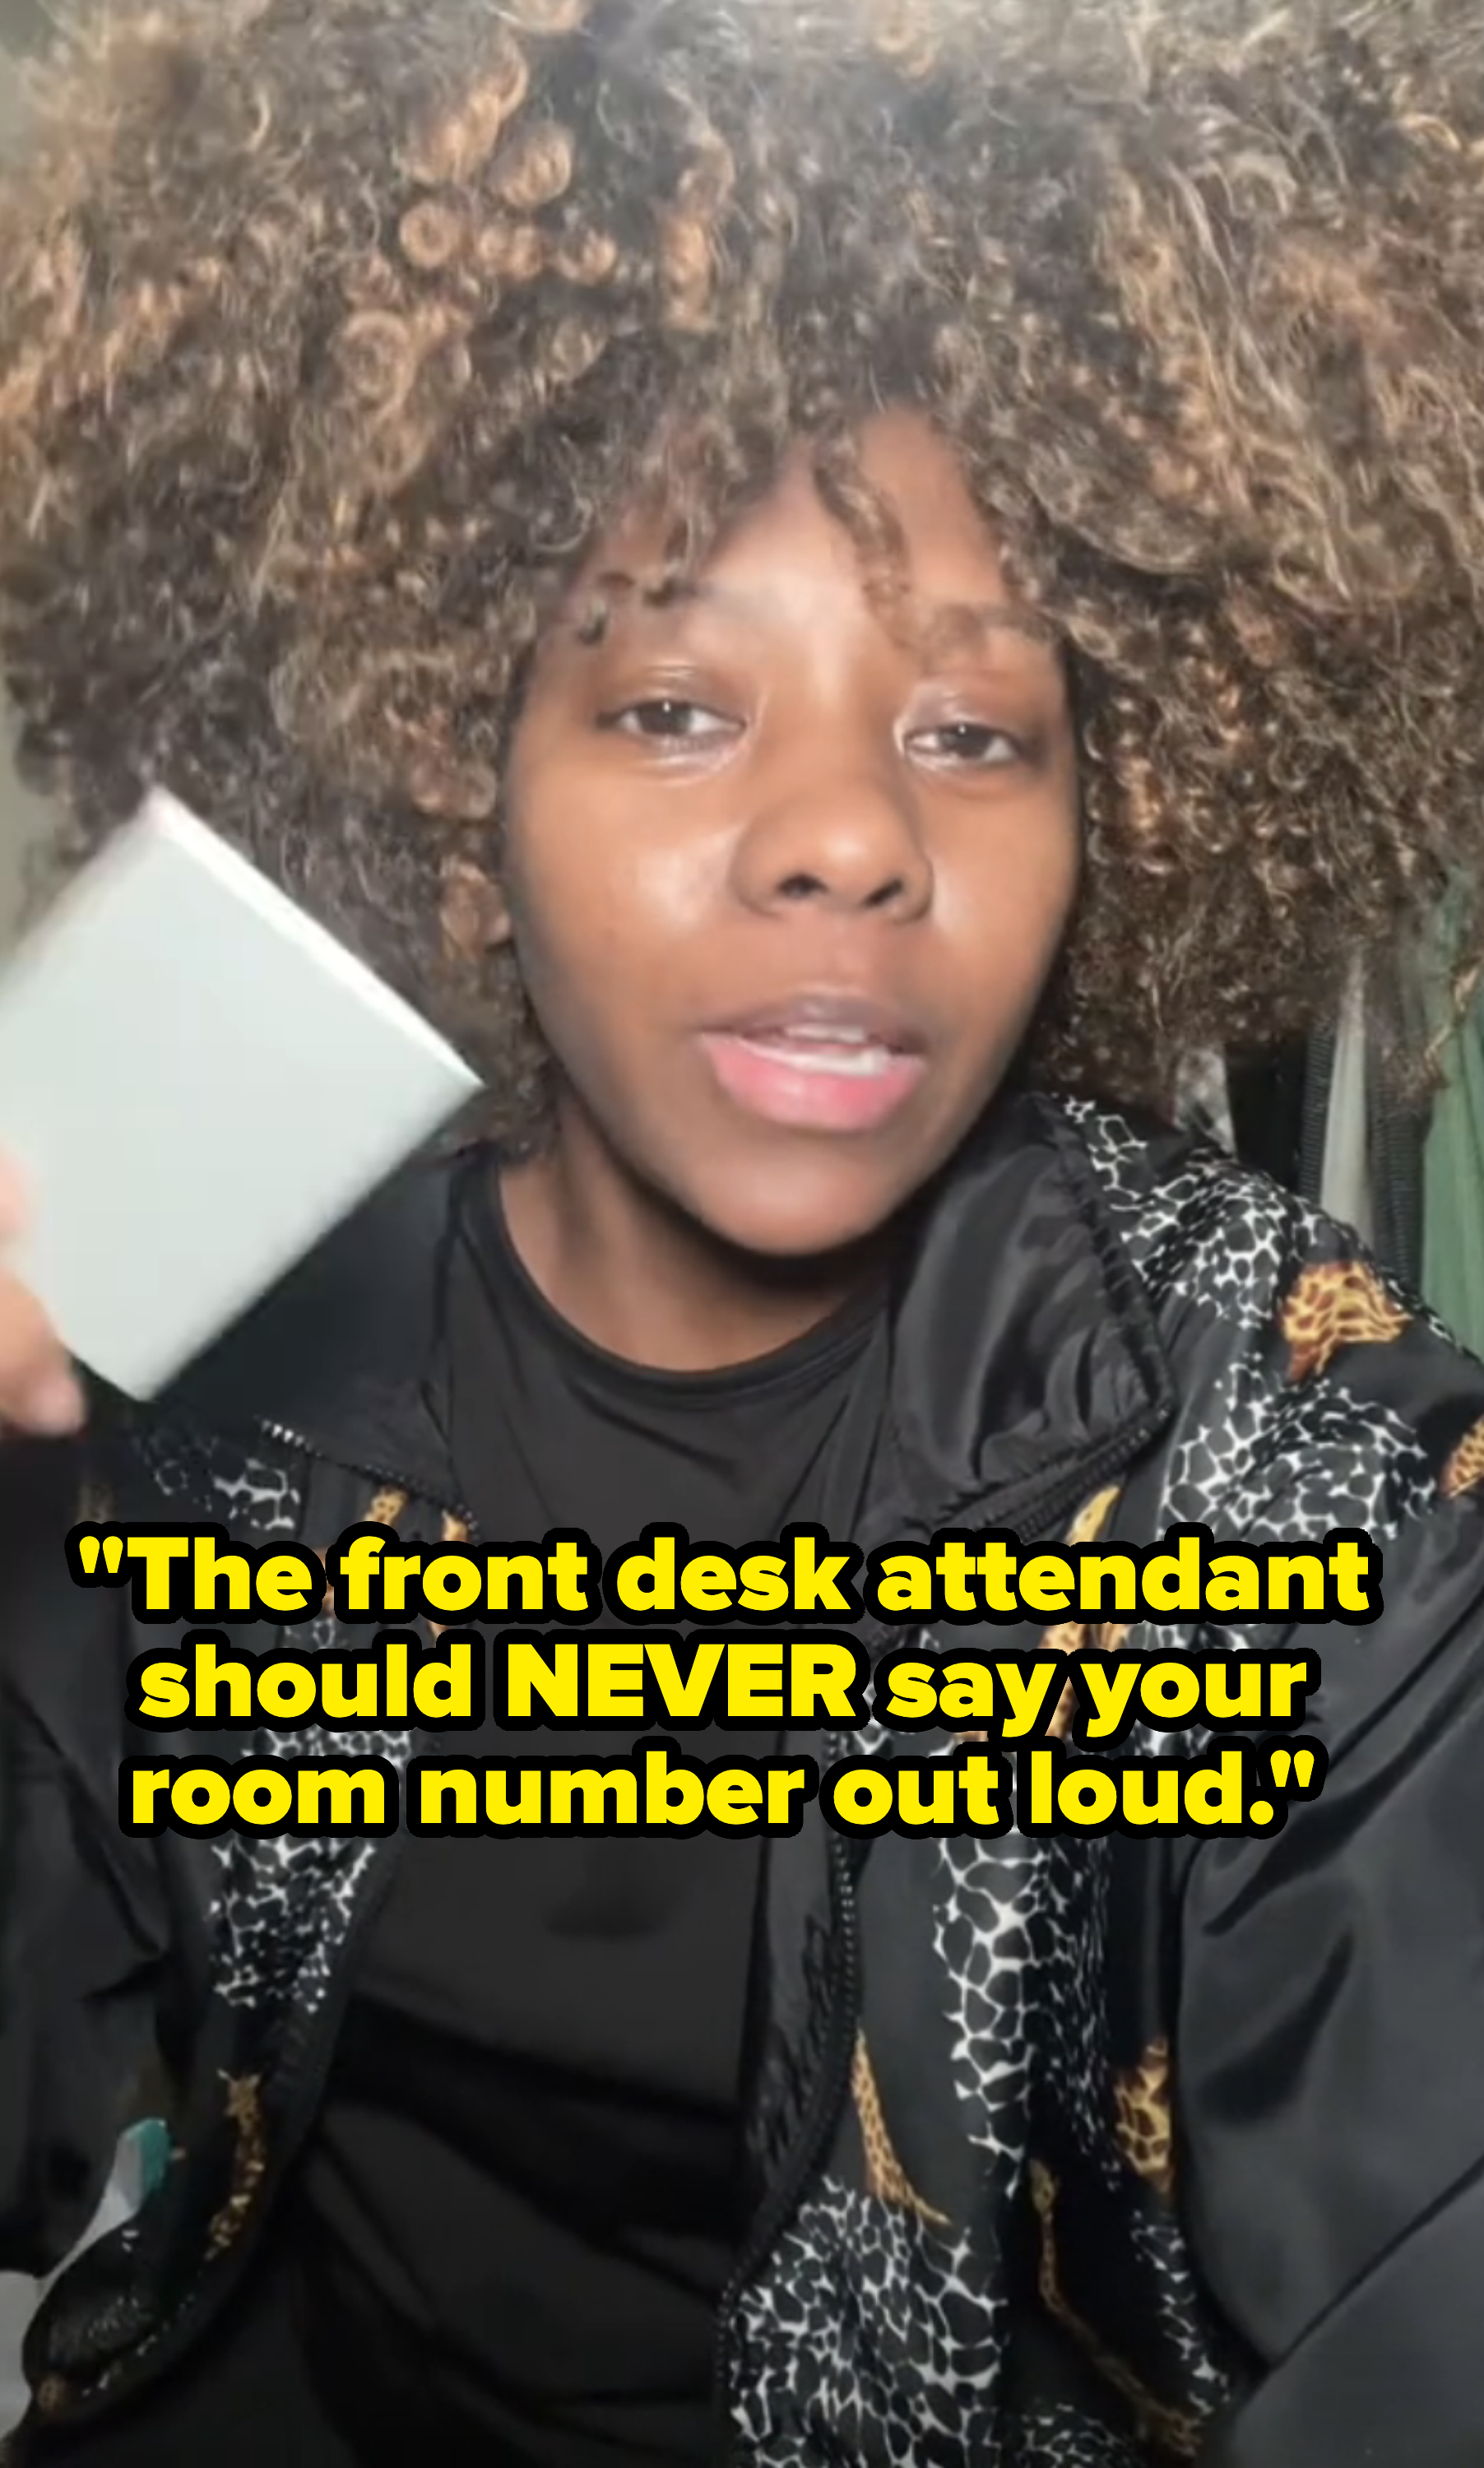 Patrice continues talking in the video with the text: &quot;The front desk attendant should never say your room number out loud&quot;